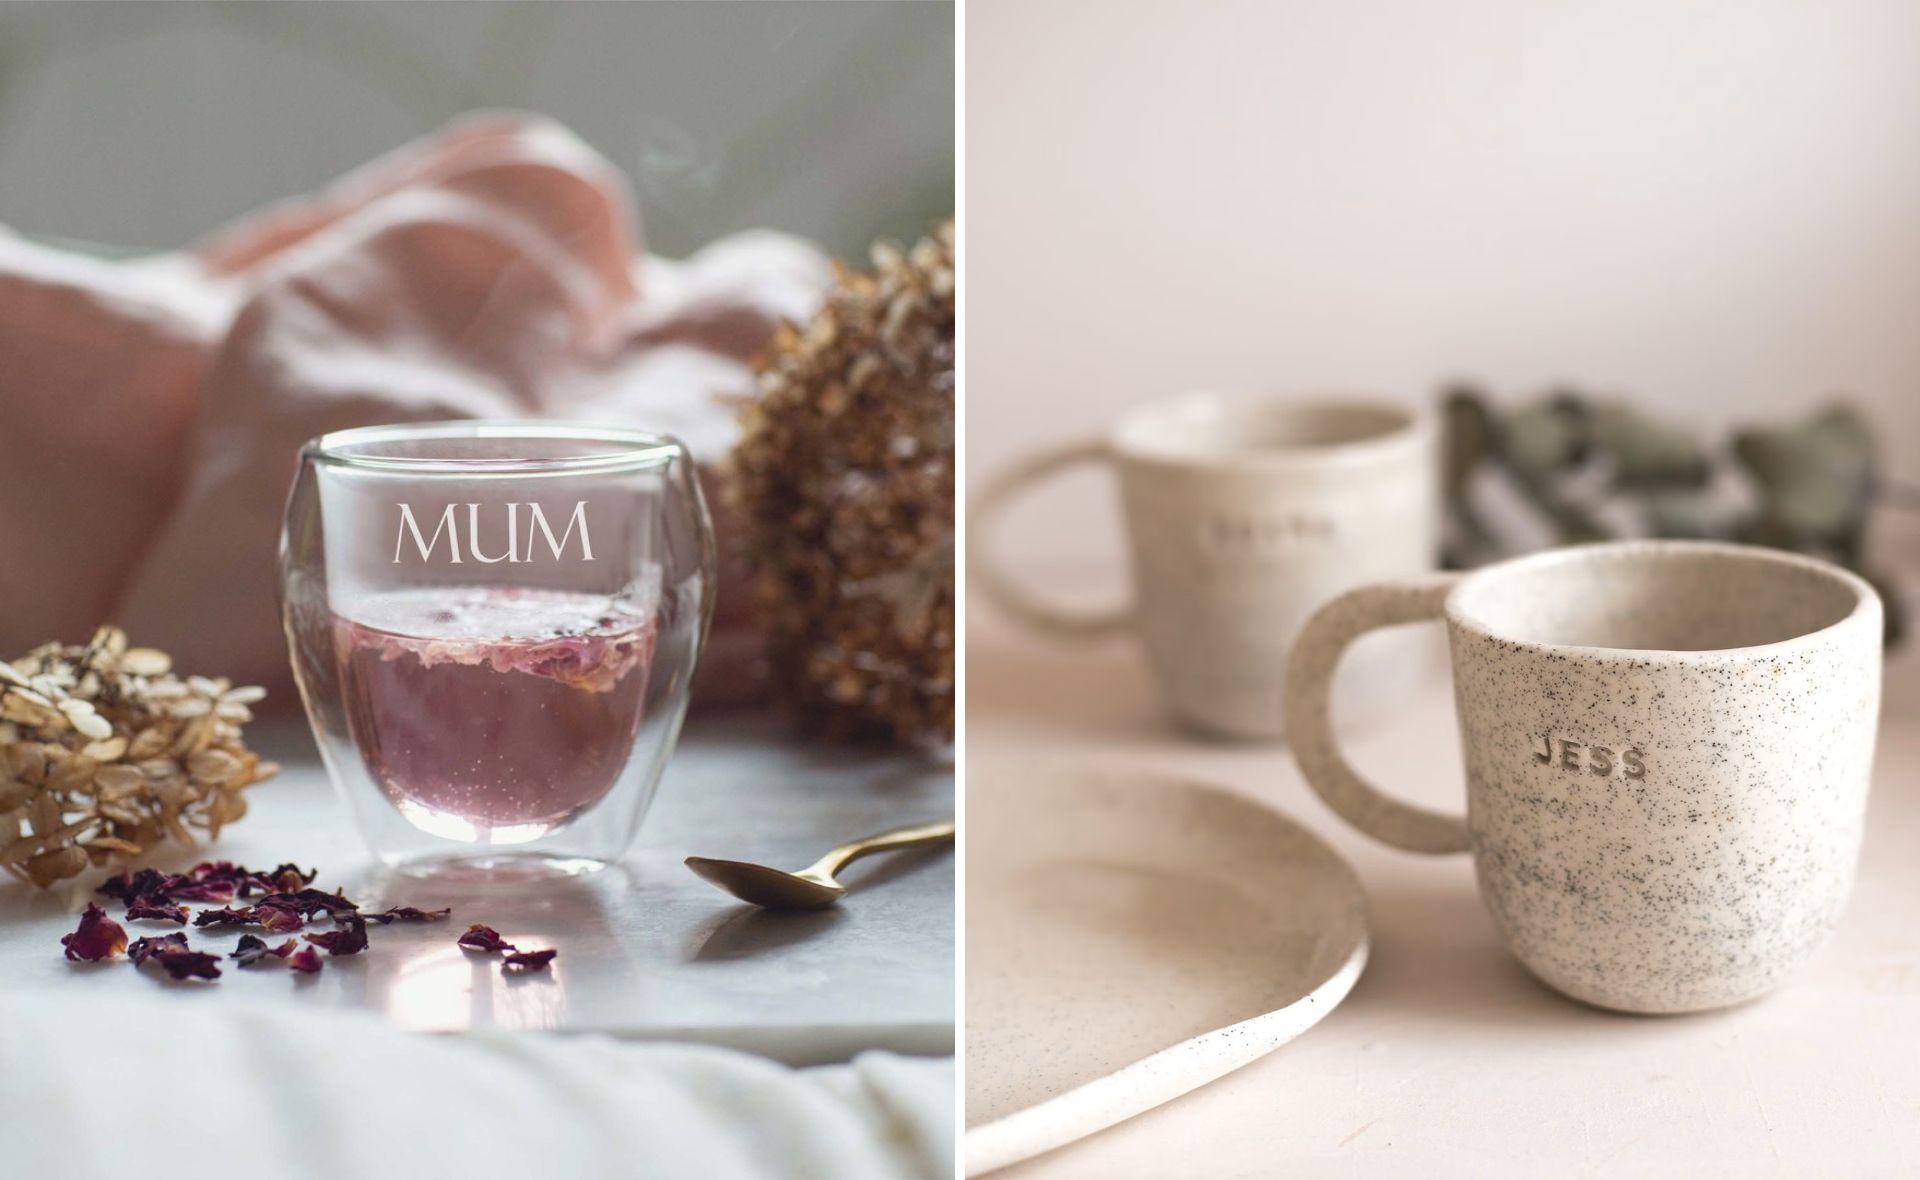 Make your morning brew a special one with these personalised mugs